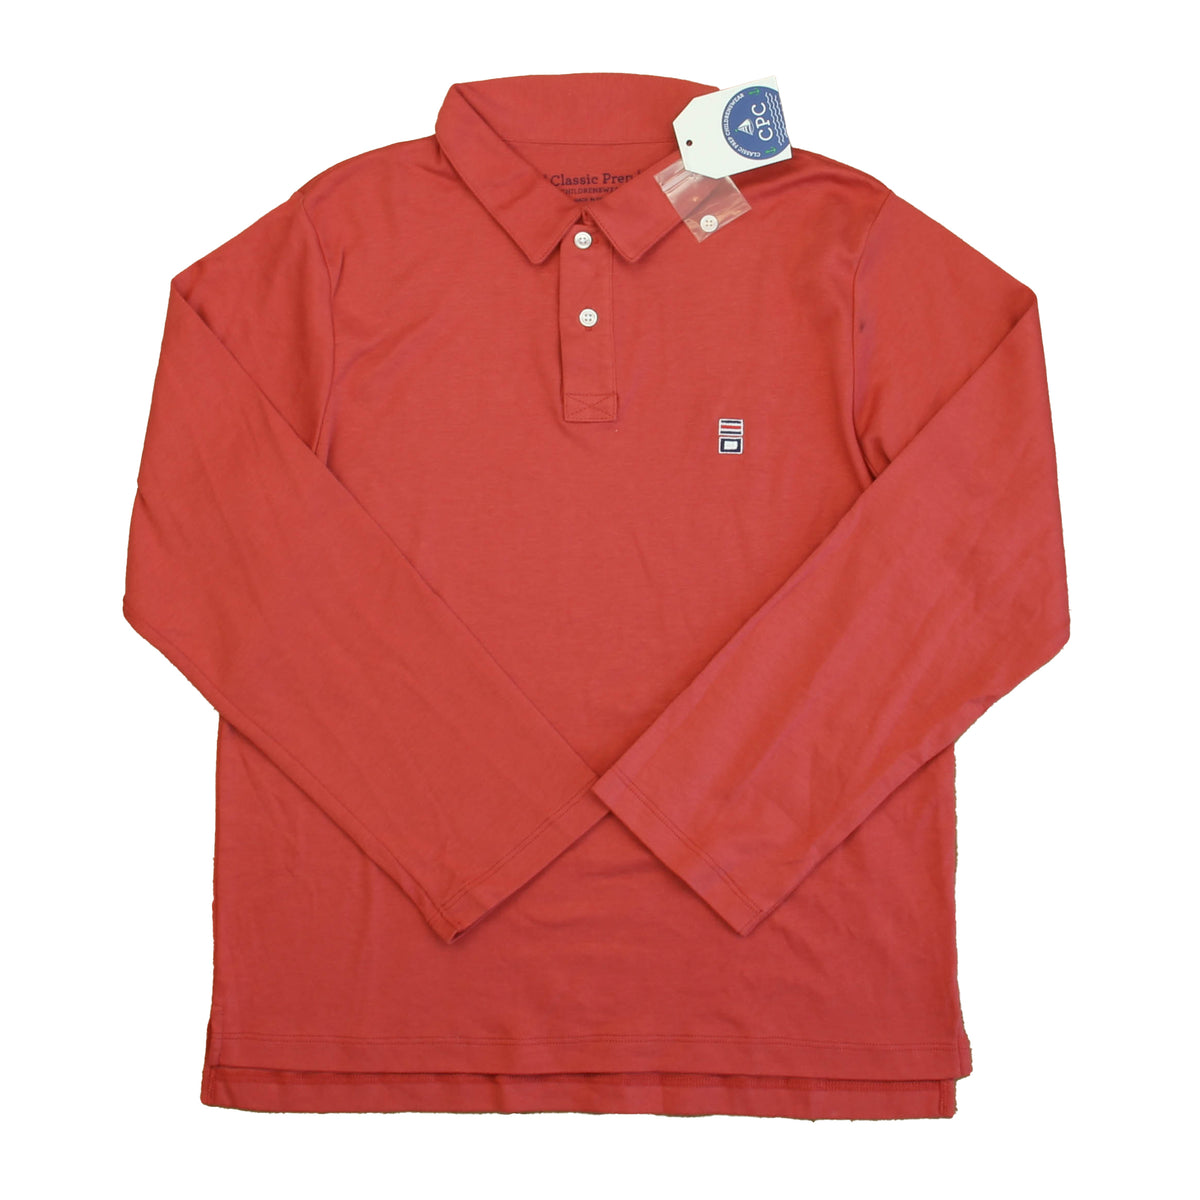 New with Tags: Mineral Red Top size: 6-14 Years -- FINAL SALE